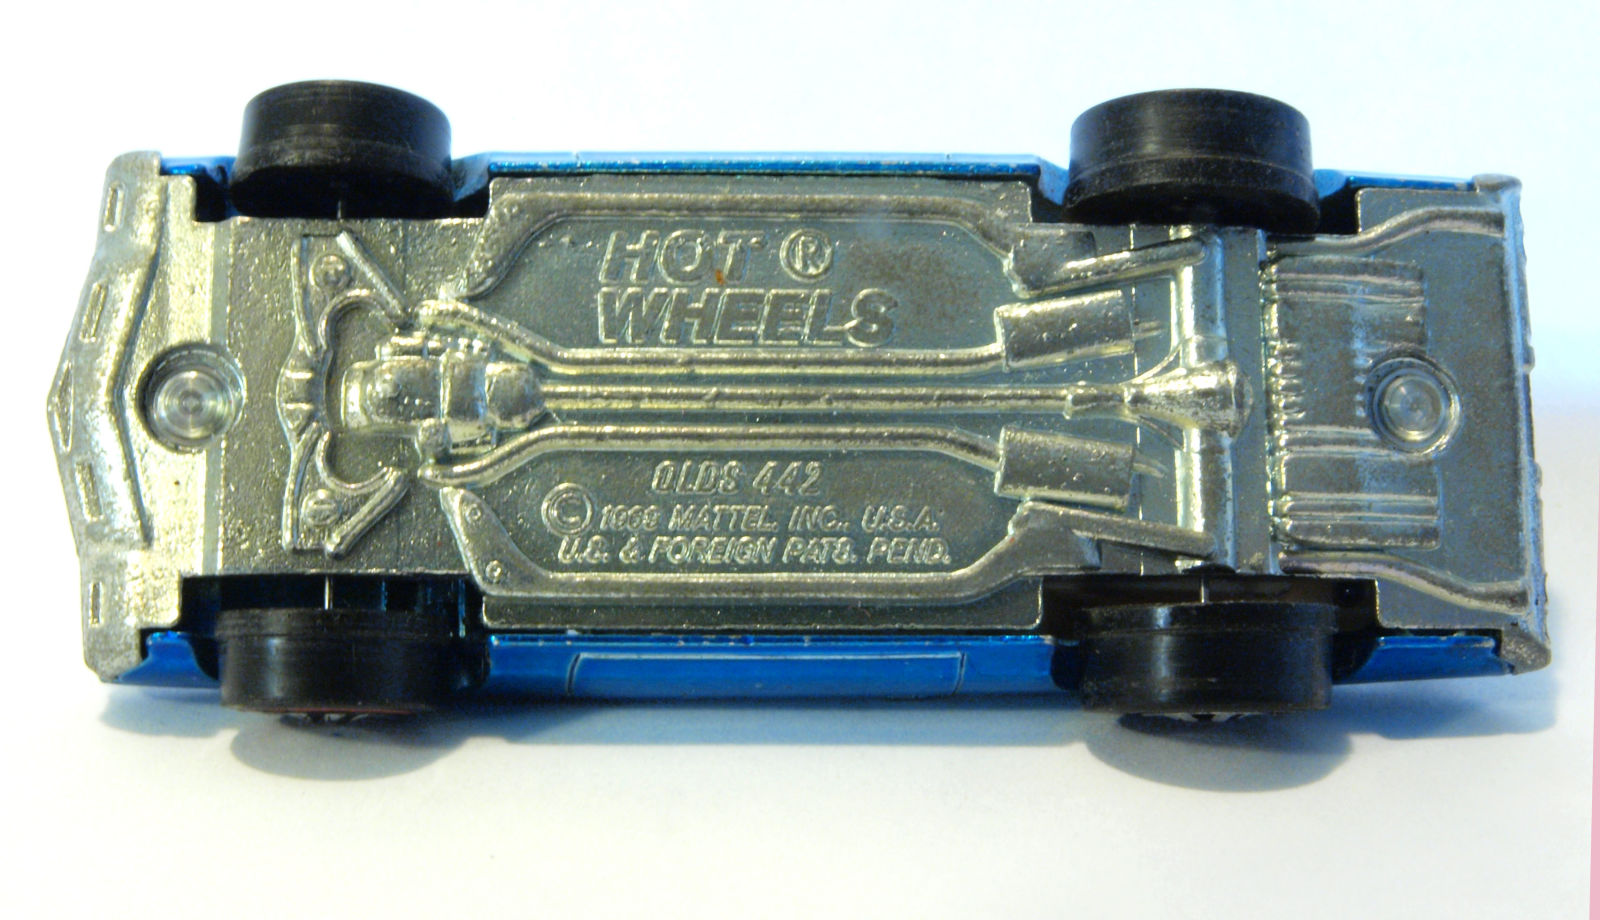 Illustration for article titled Diecast 101: The start of Hot Wheels, a synopsis